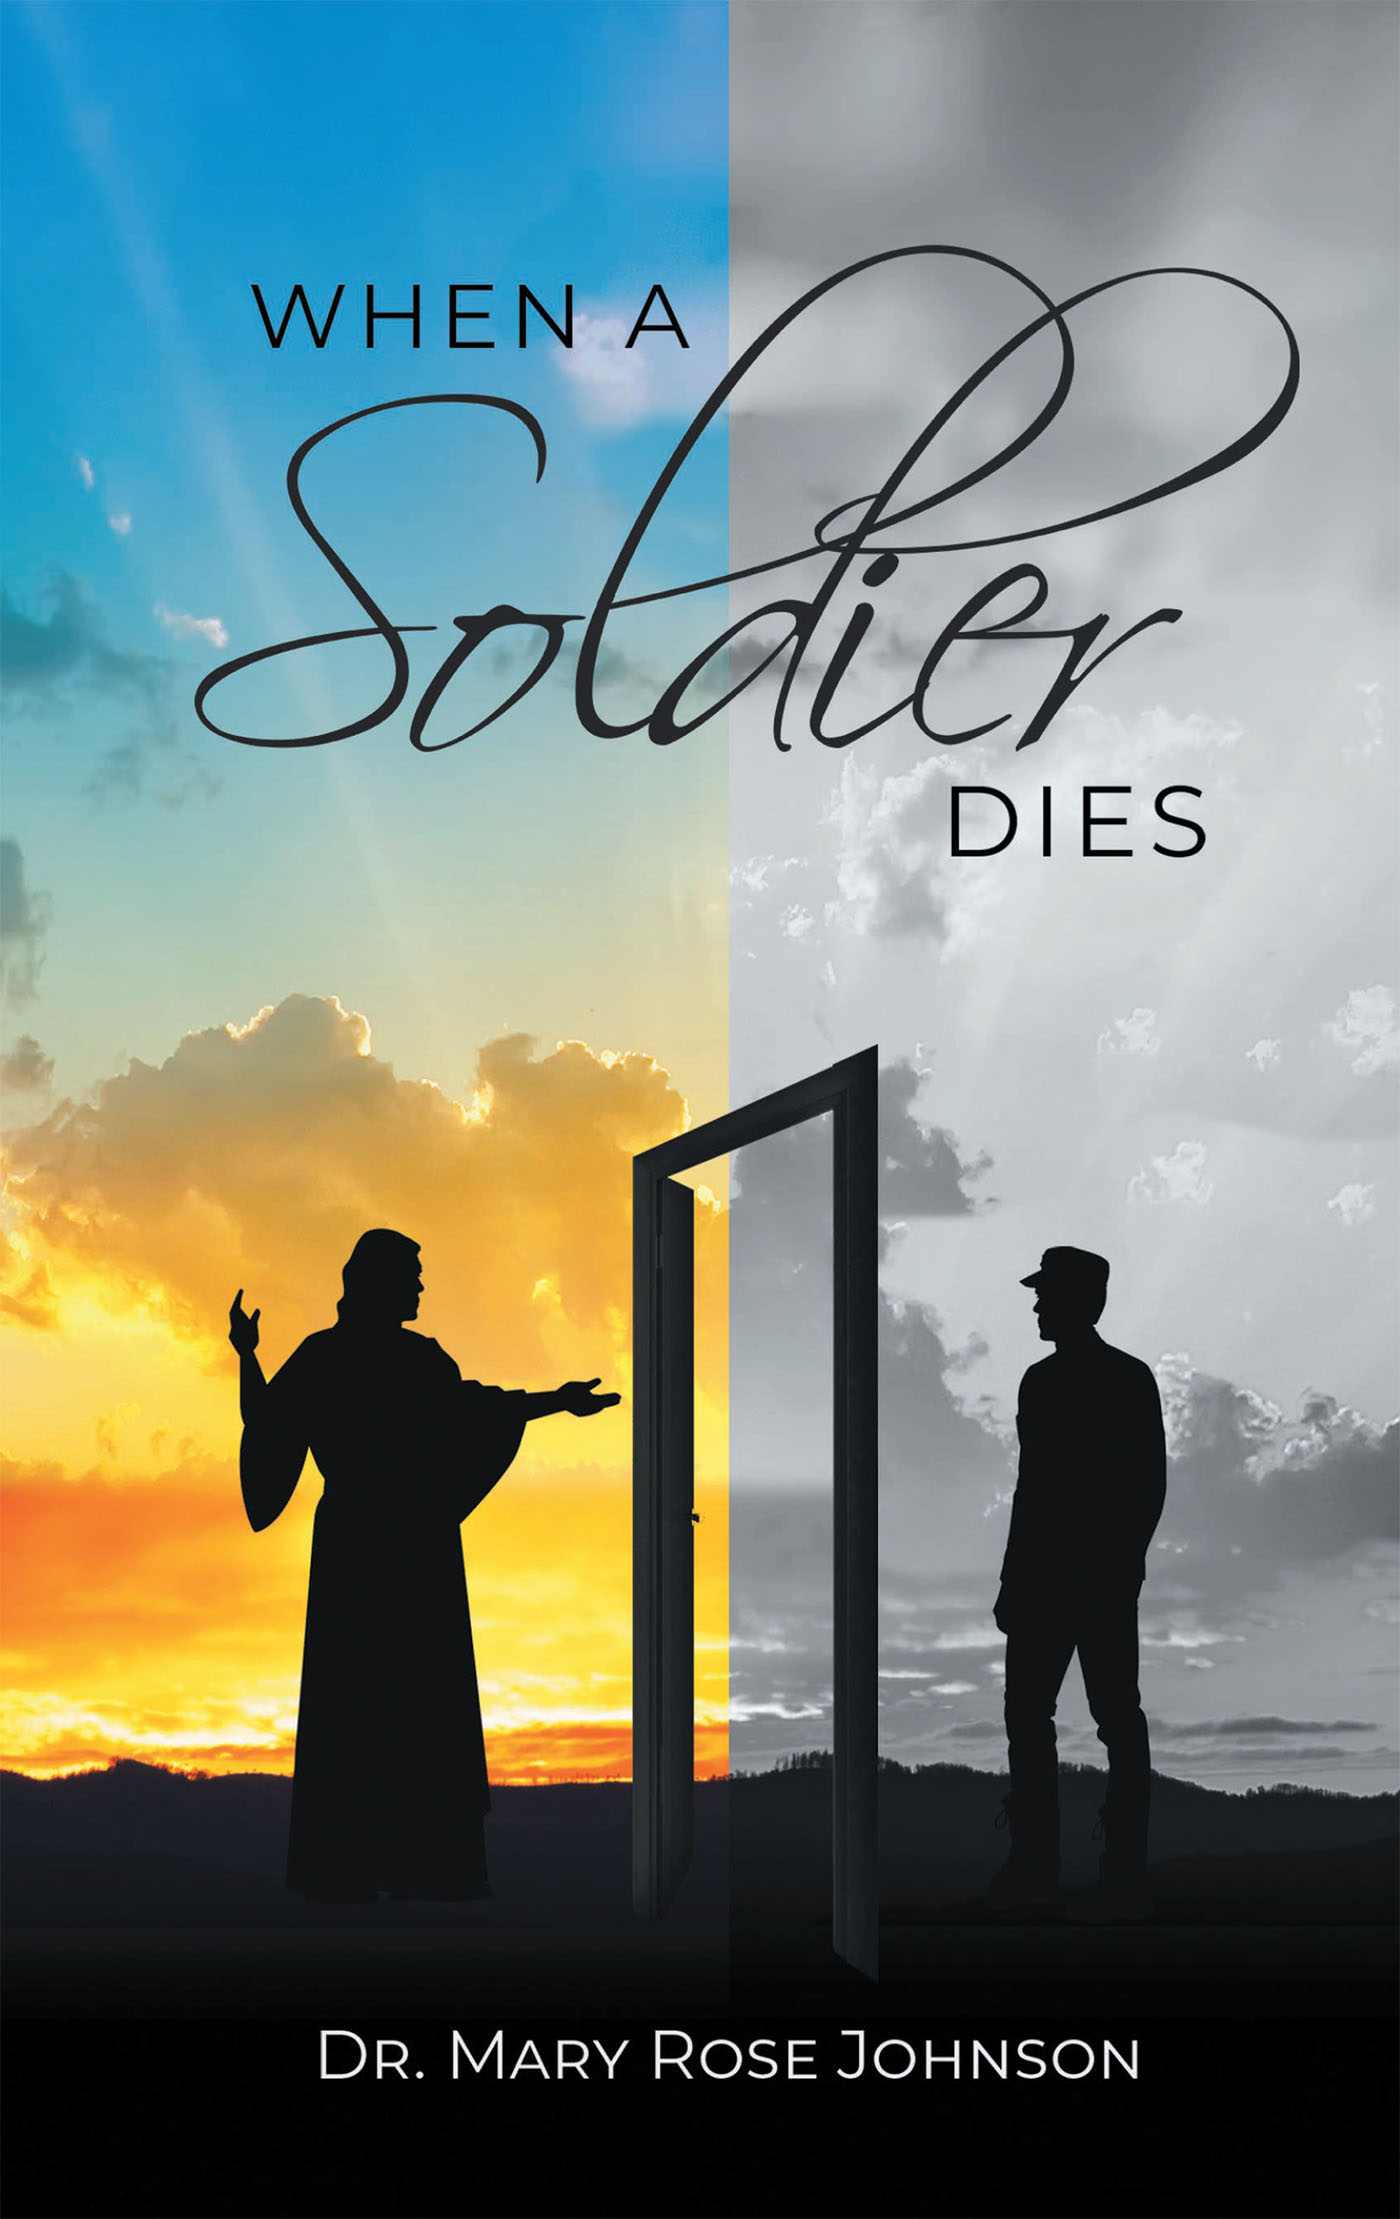 Author Dr. Mary Rose Johnson’s New Book, "When a Soldier Dies," Encourages Readers Not to Take the Journey of Grieving the Loss of a Loved One Alone